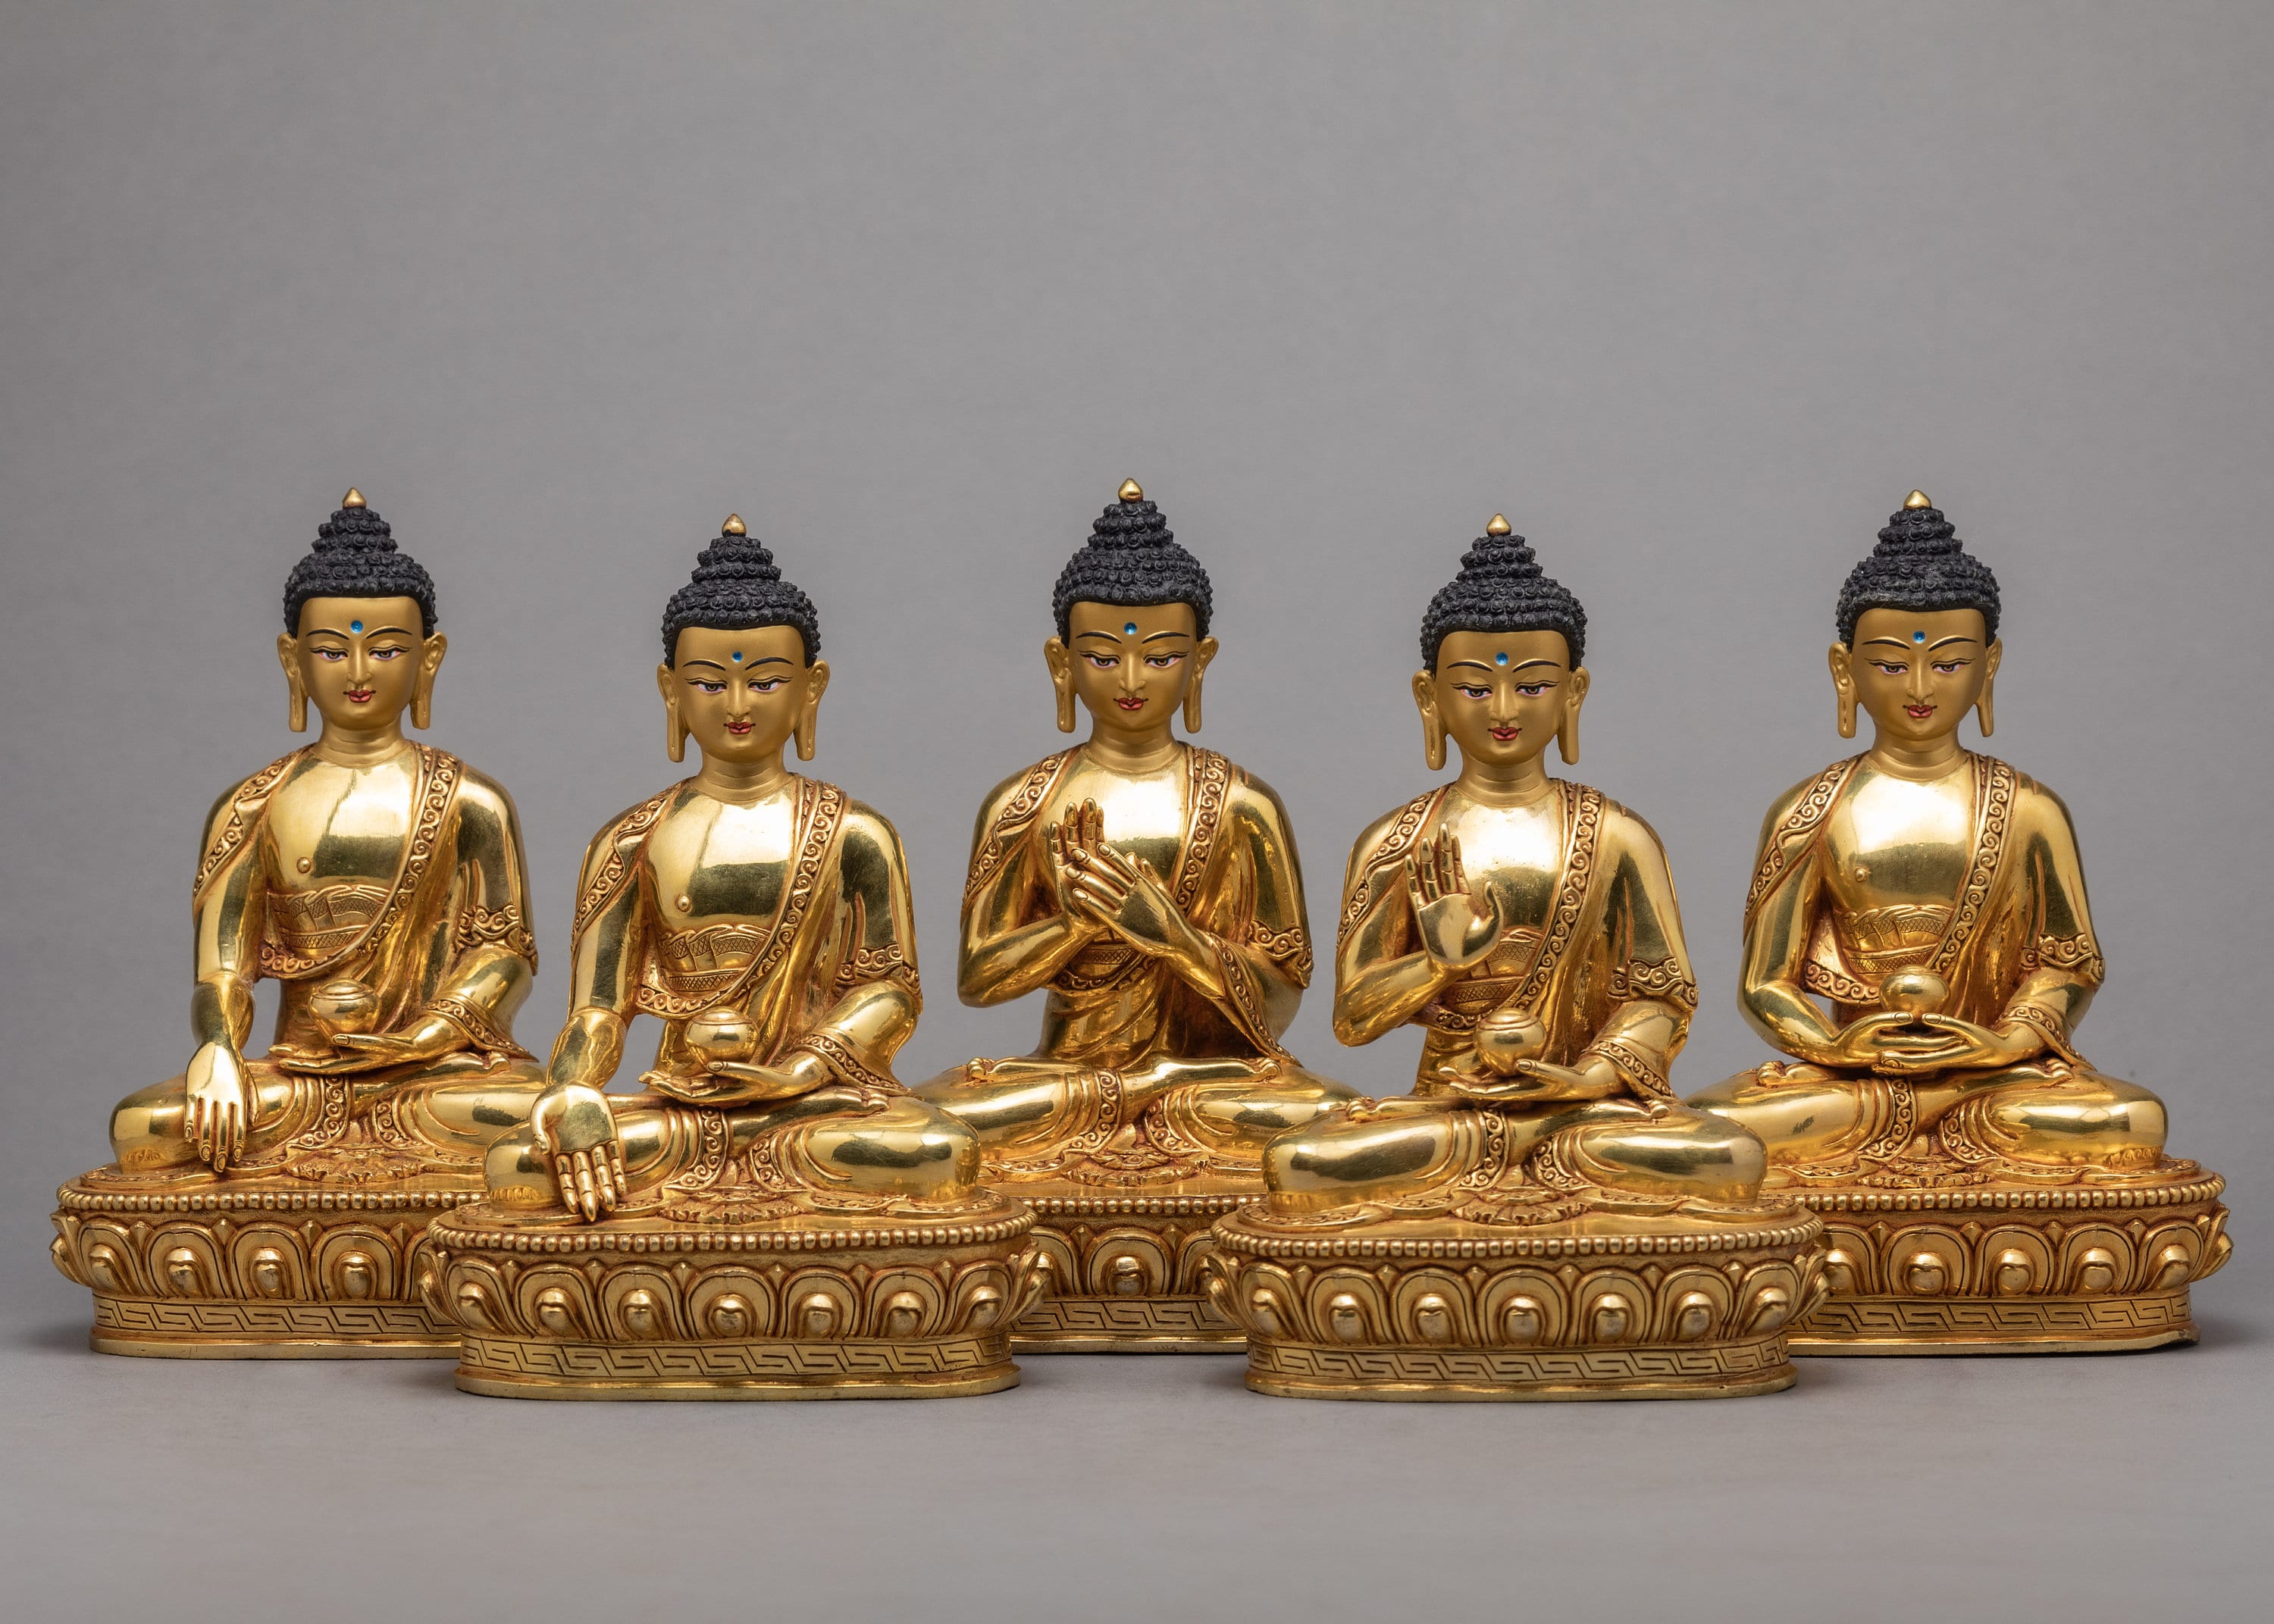 Why do I often see Buddha statues with one hand raised? - Quora